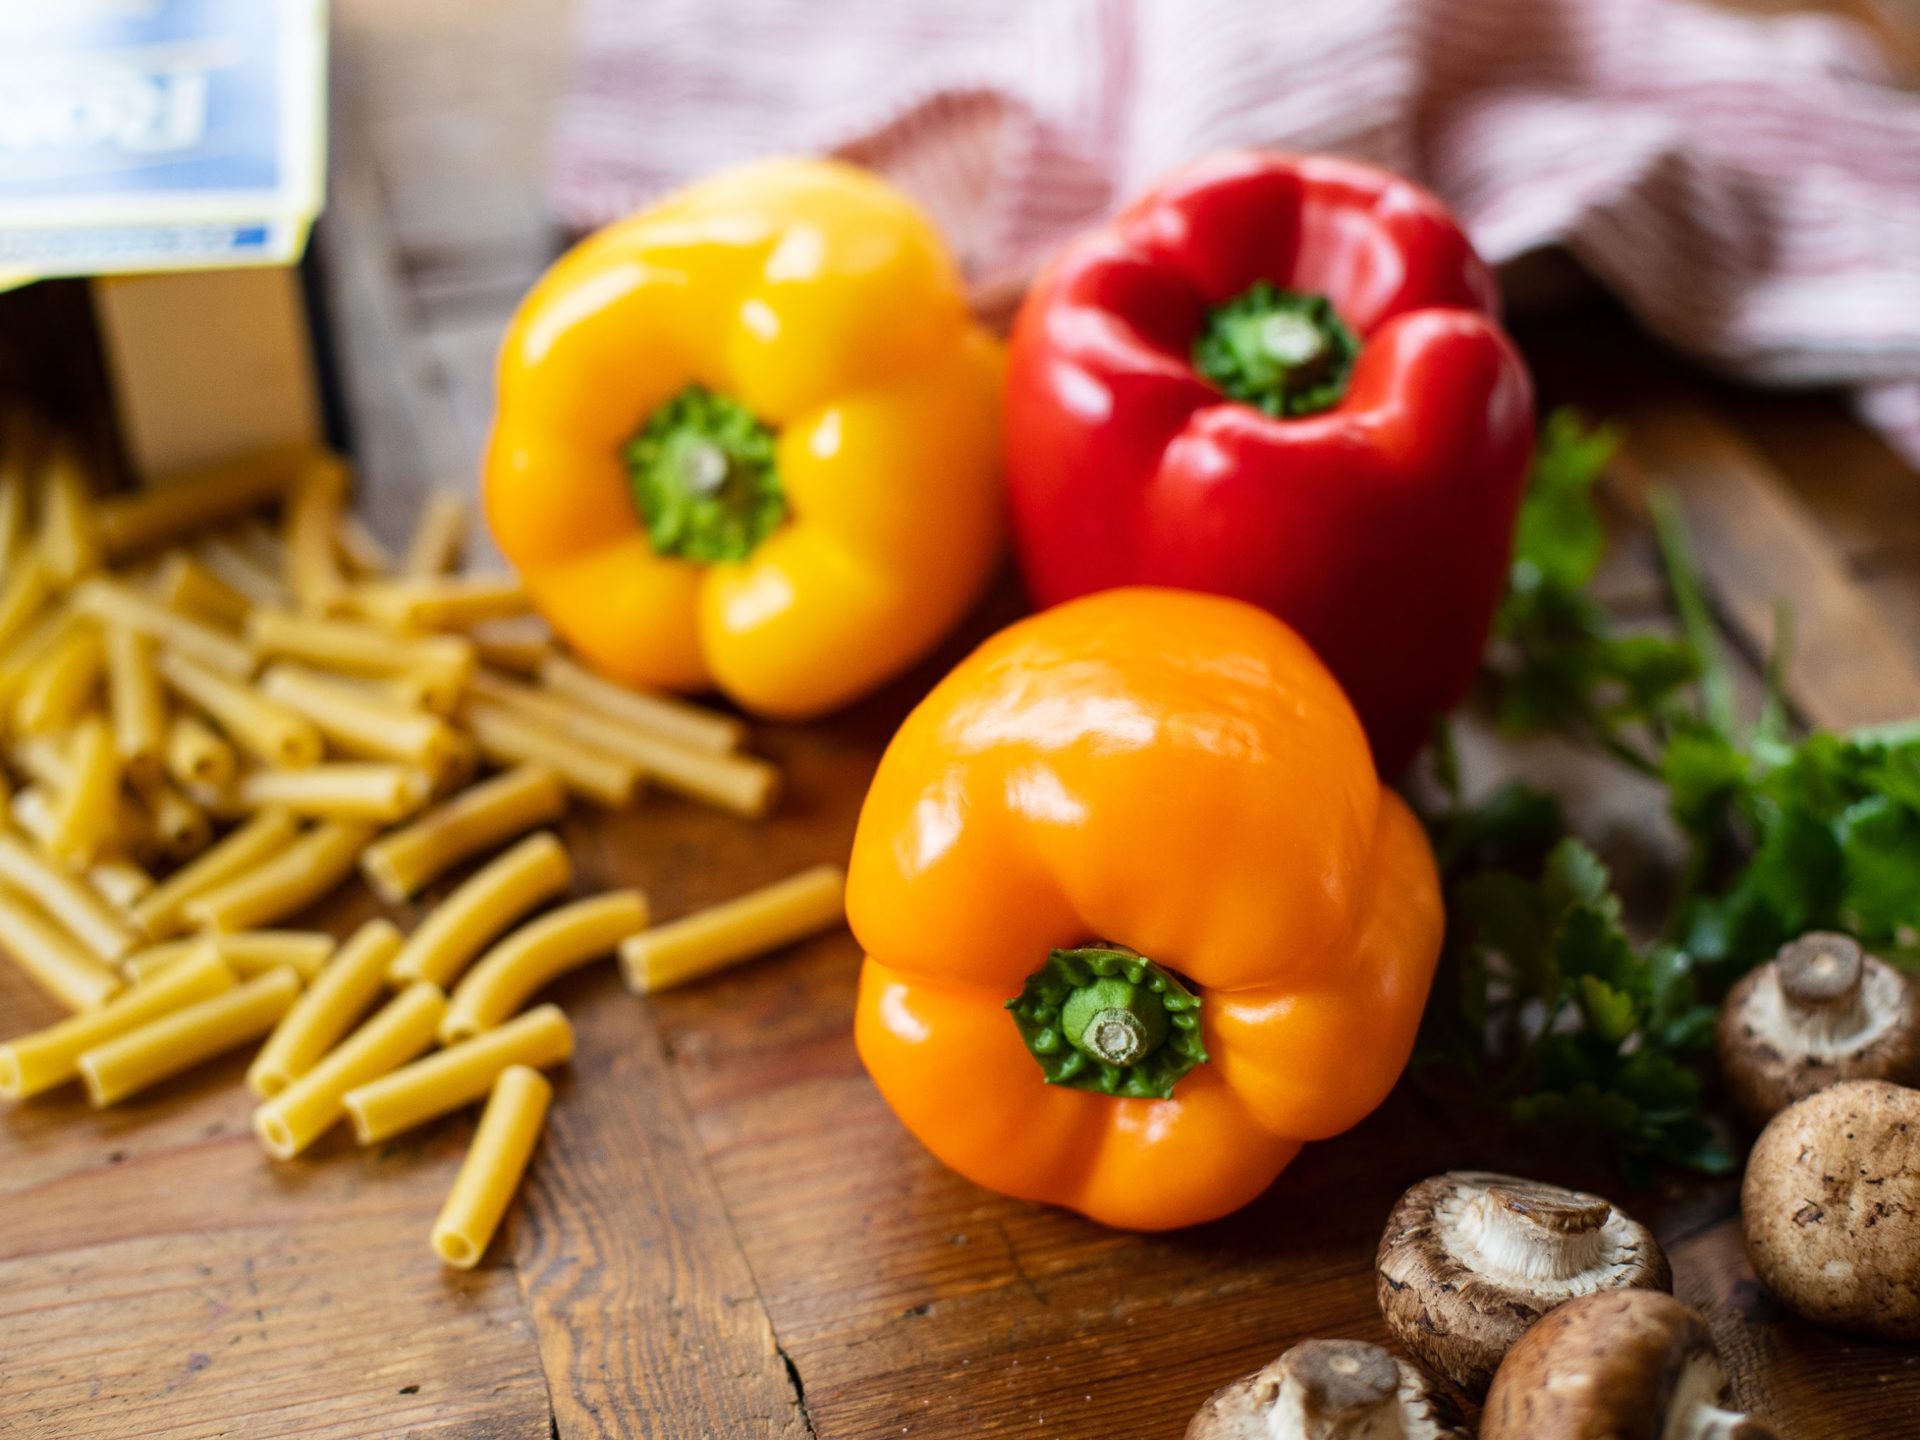 Kroger Tri-Color Bell Peppers 3-Count Package Just $1.99